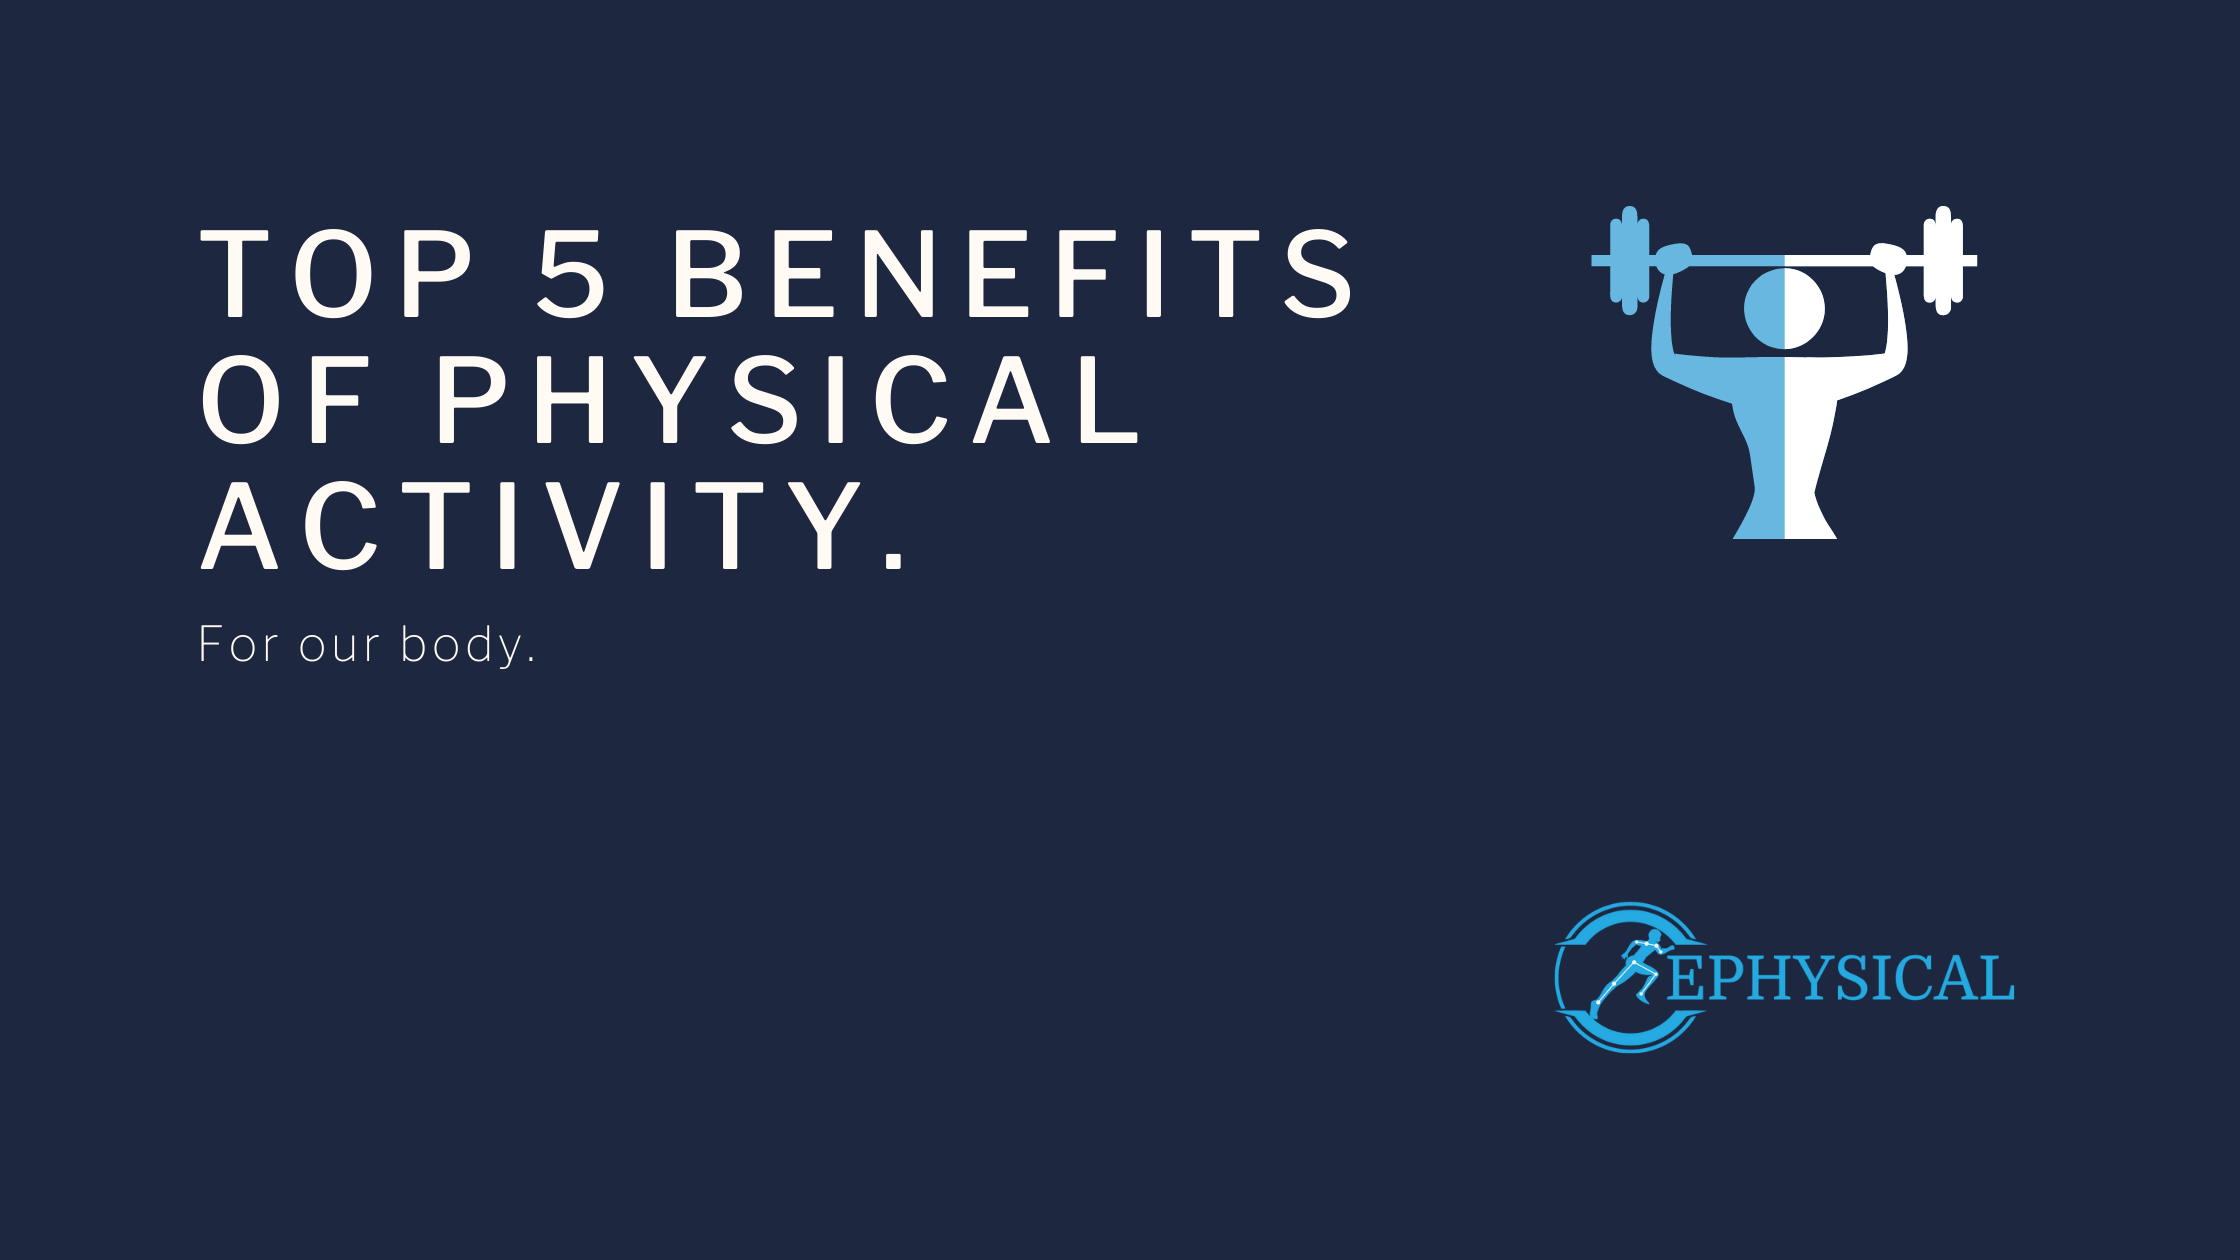 Top 5 benefits of physical activity ephysical